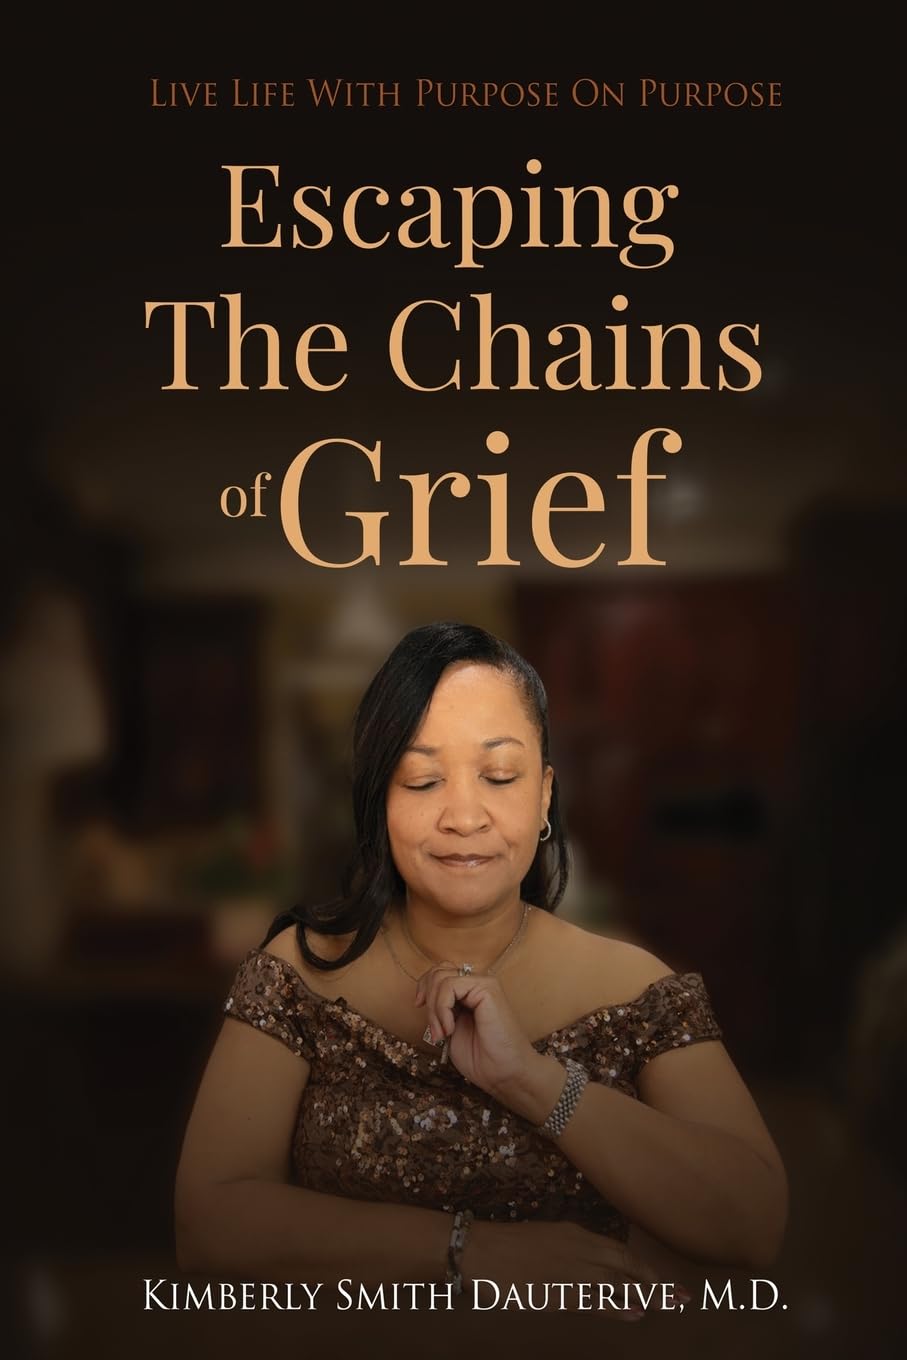 Renowned Physician Dr. Kimberly Smith Dauterive Set to Release Groundbreaking Book: "Escaping the Chains of Grief: Live Life With Purpose on Purpose"